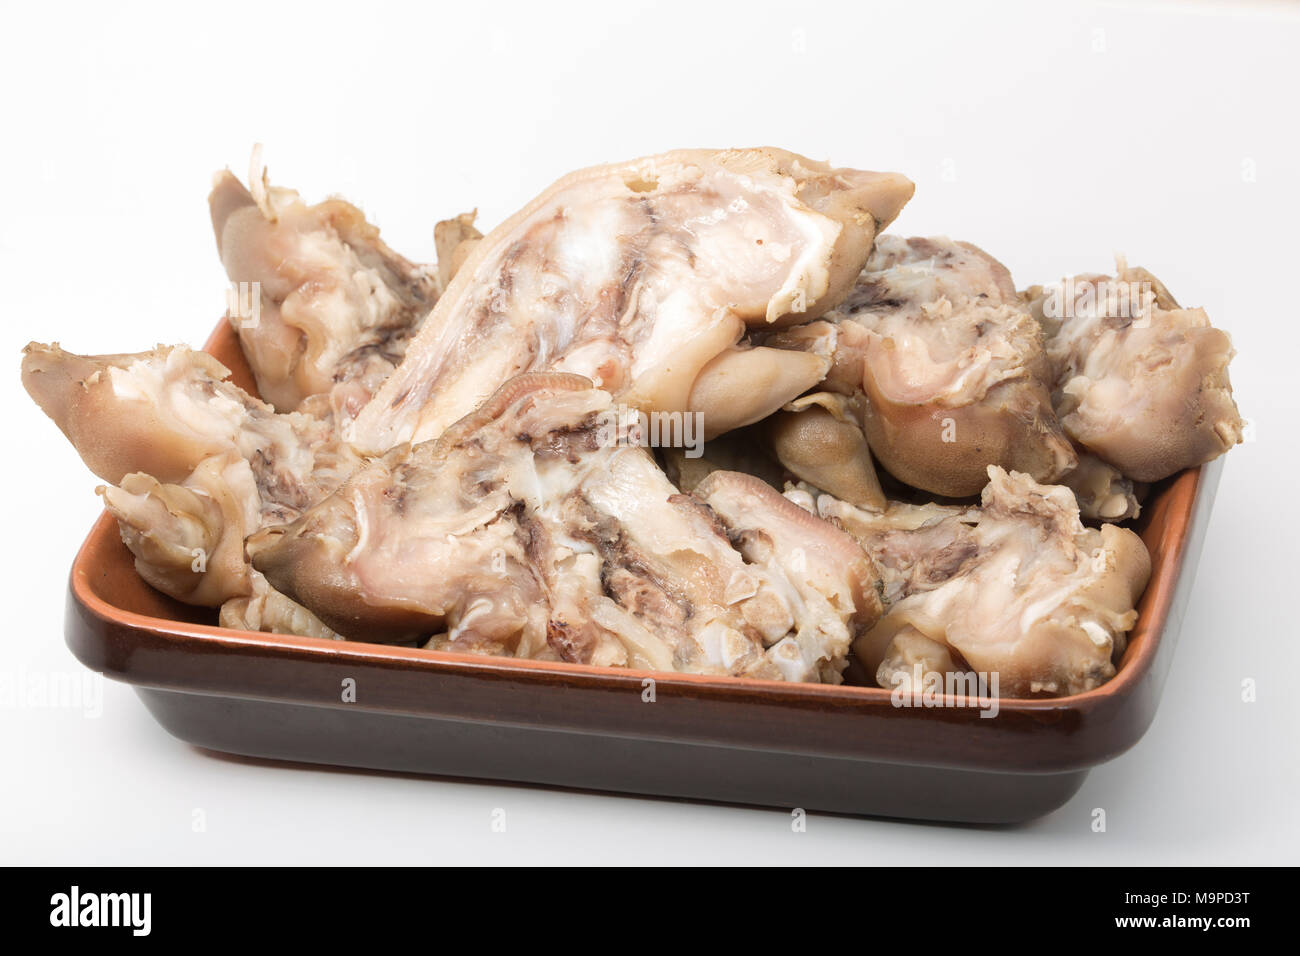 Pigs trotters that have been boiled until tender and split and left to cool before being eaten with a splash of vinegar UK. Pigs trotters are rich in Stock Photo